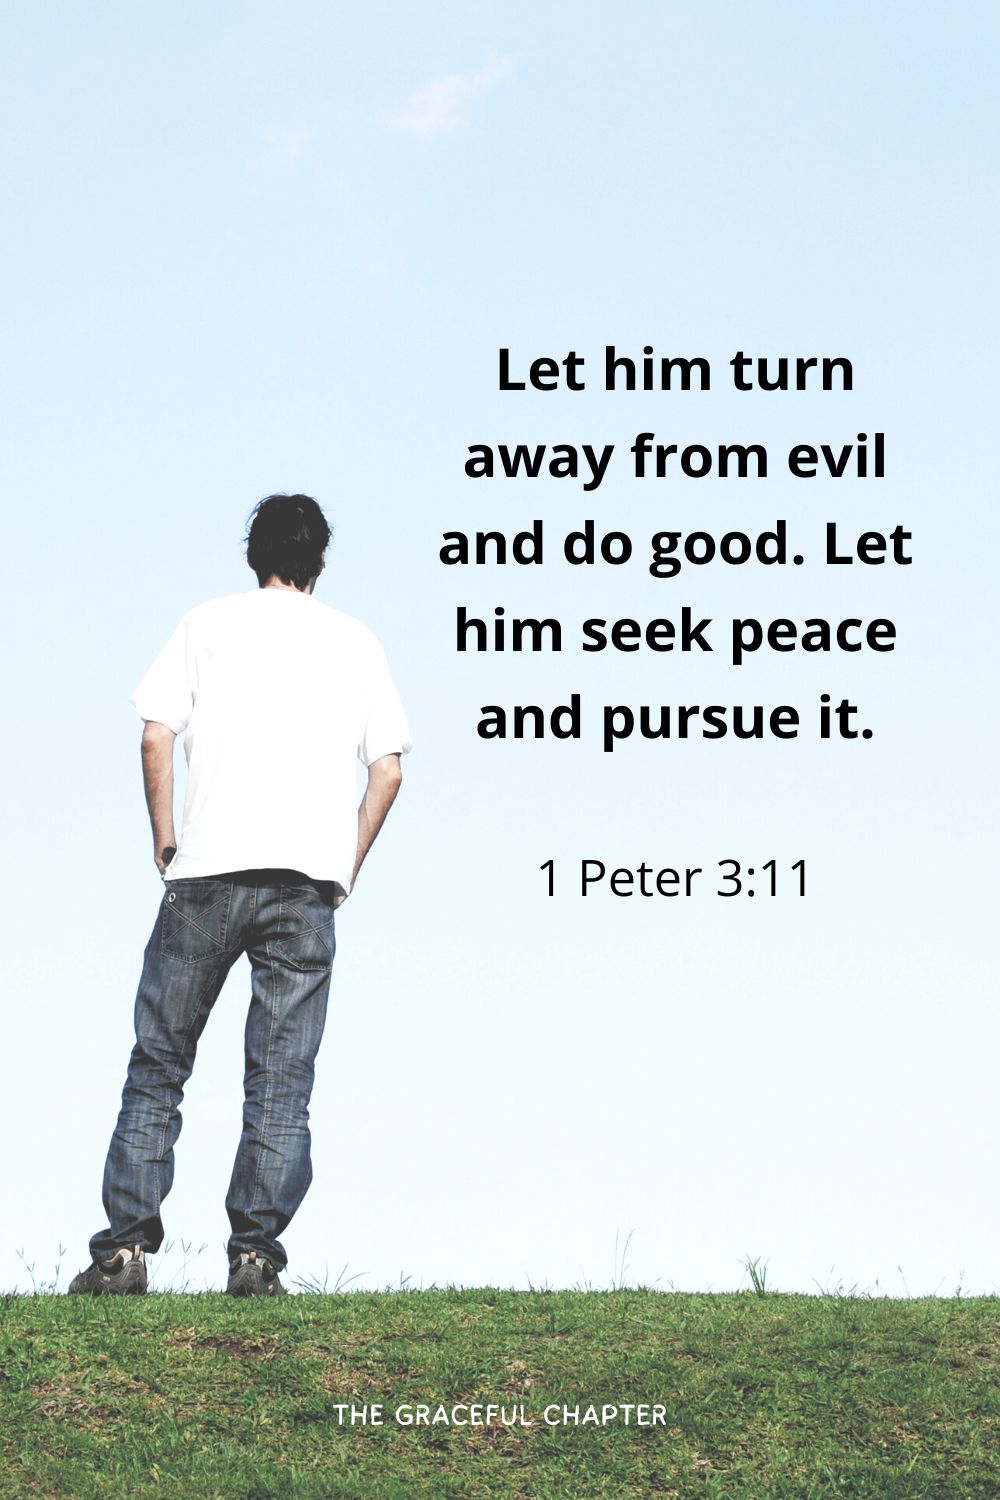 Let him turn away from evil and do good. Let him seek peace and pursue it.